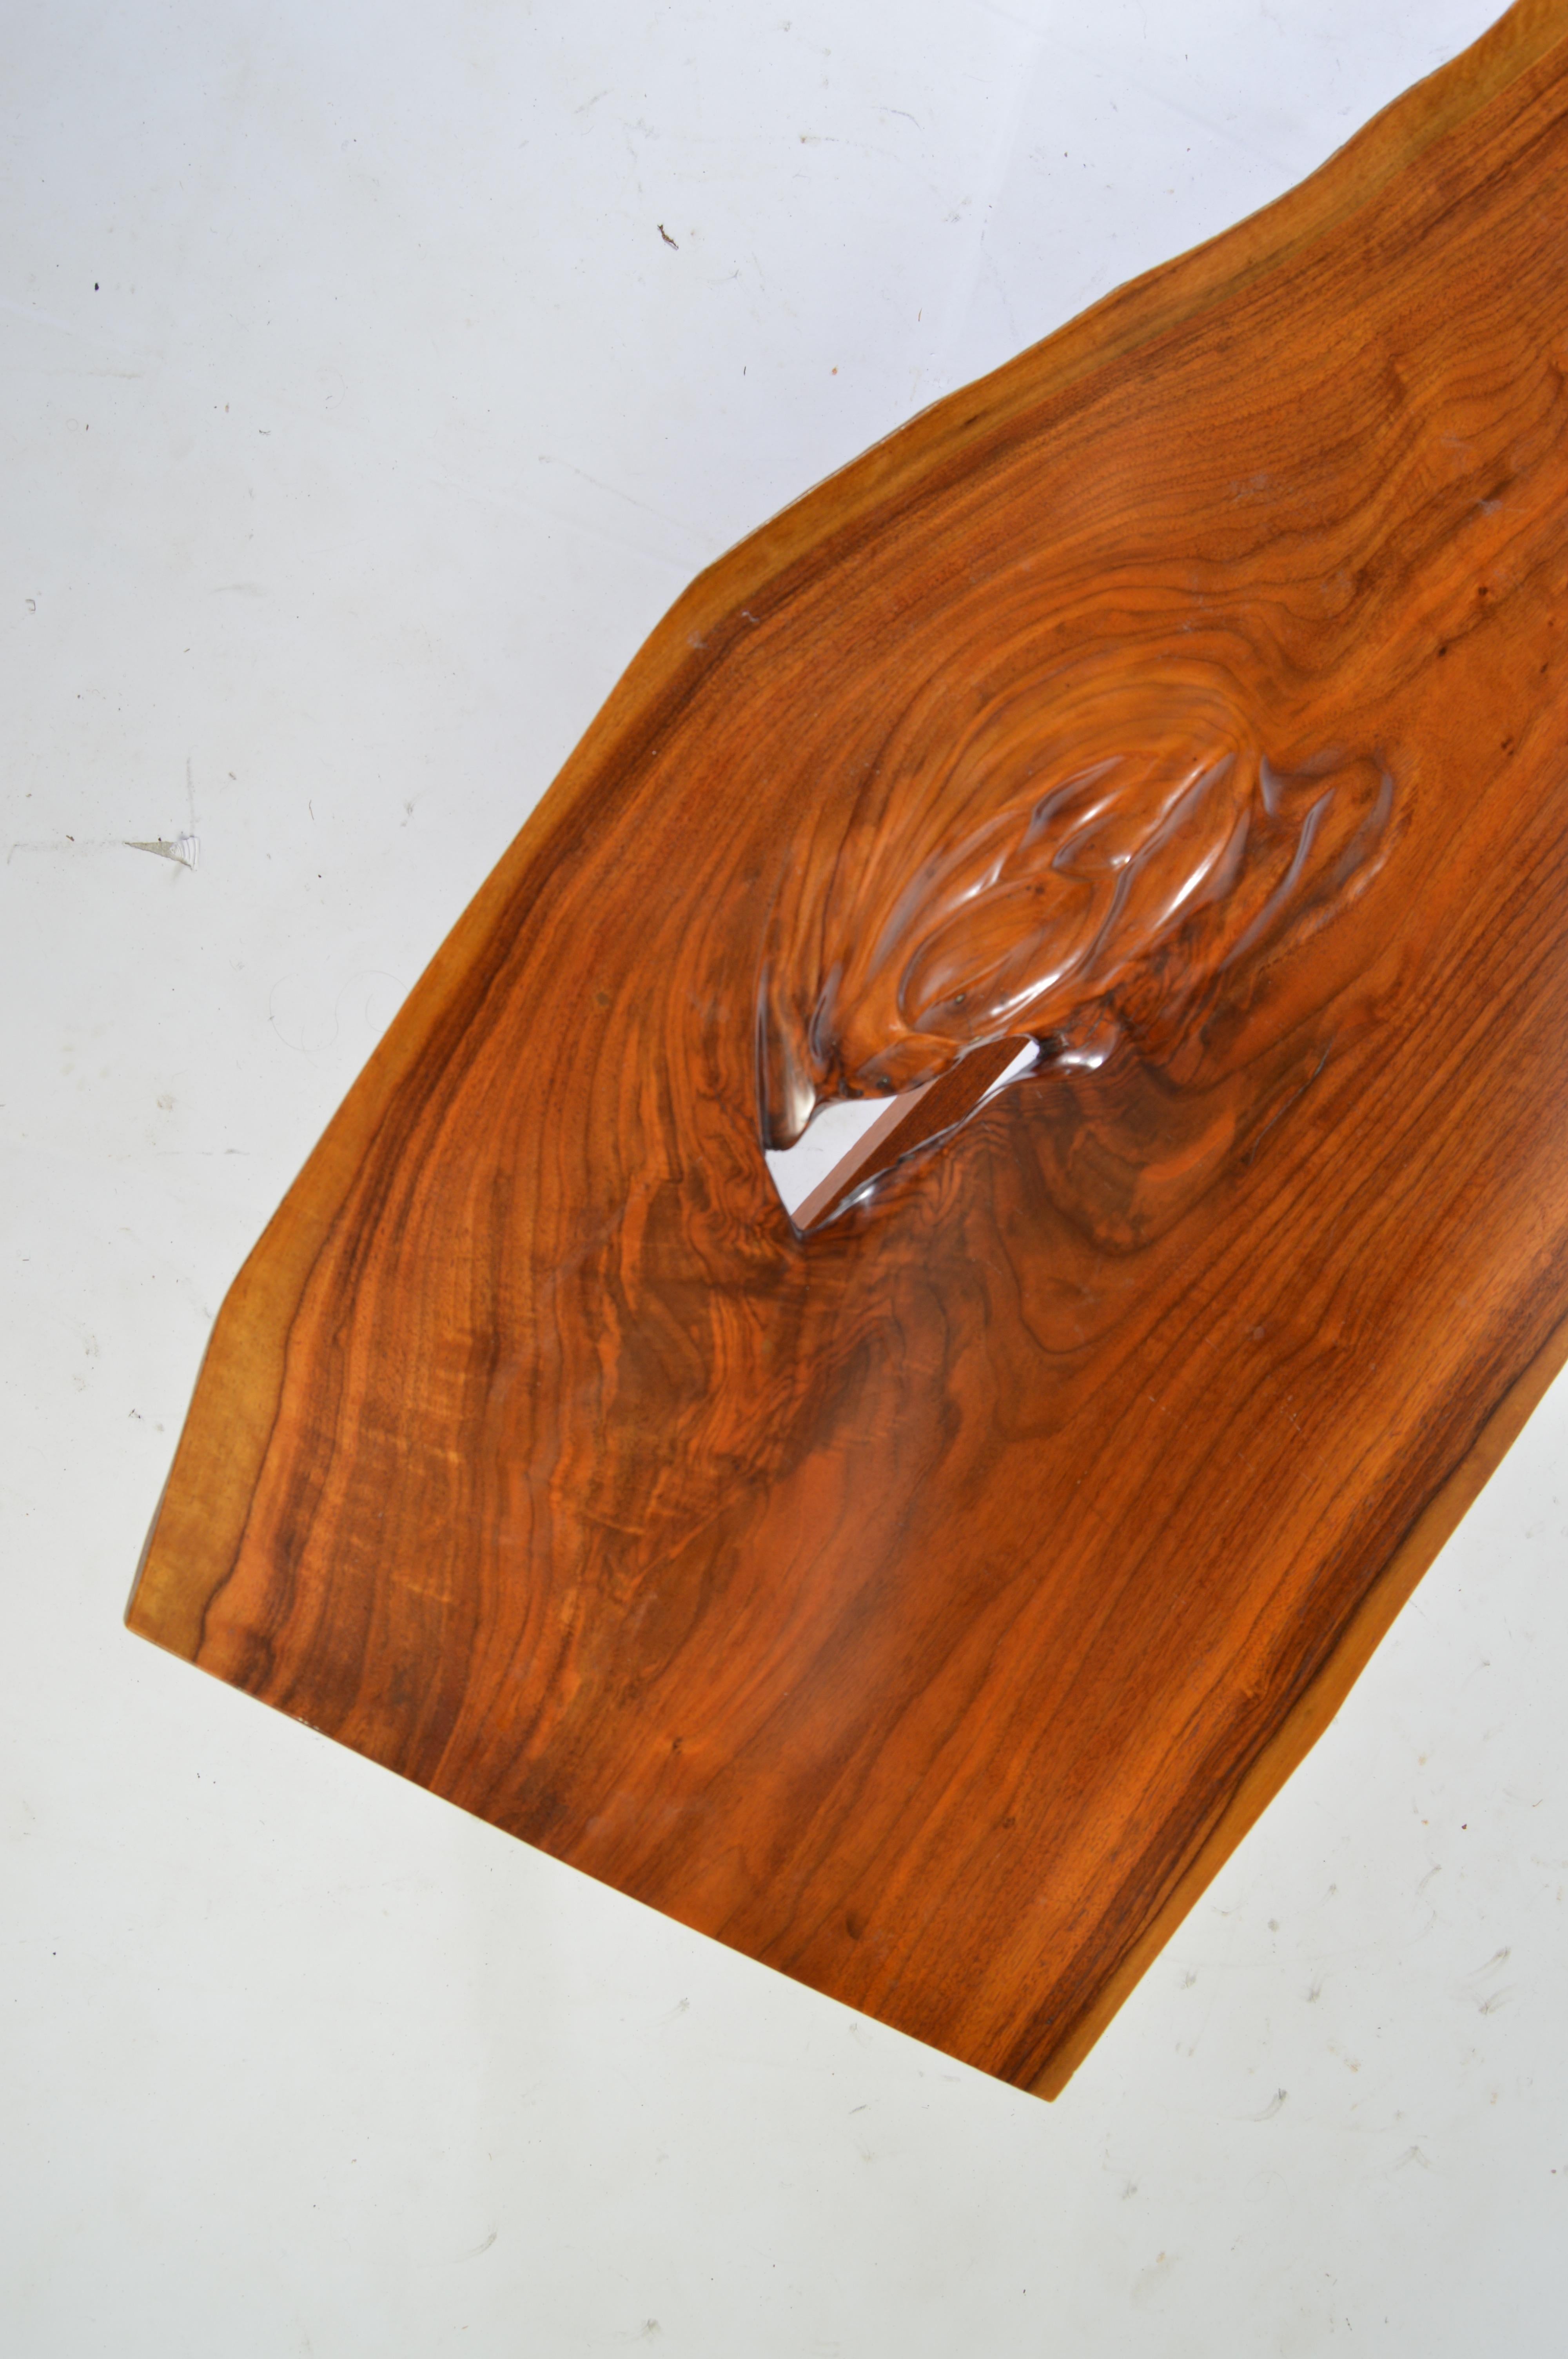 An early example of James Martin's work created while he was still working at The Nakashima Studio in New Hope, PA. 
 The walnut used is adjusted with notching by Jim Martin detailing his signature style. James Martin would later open his own